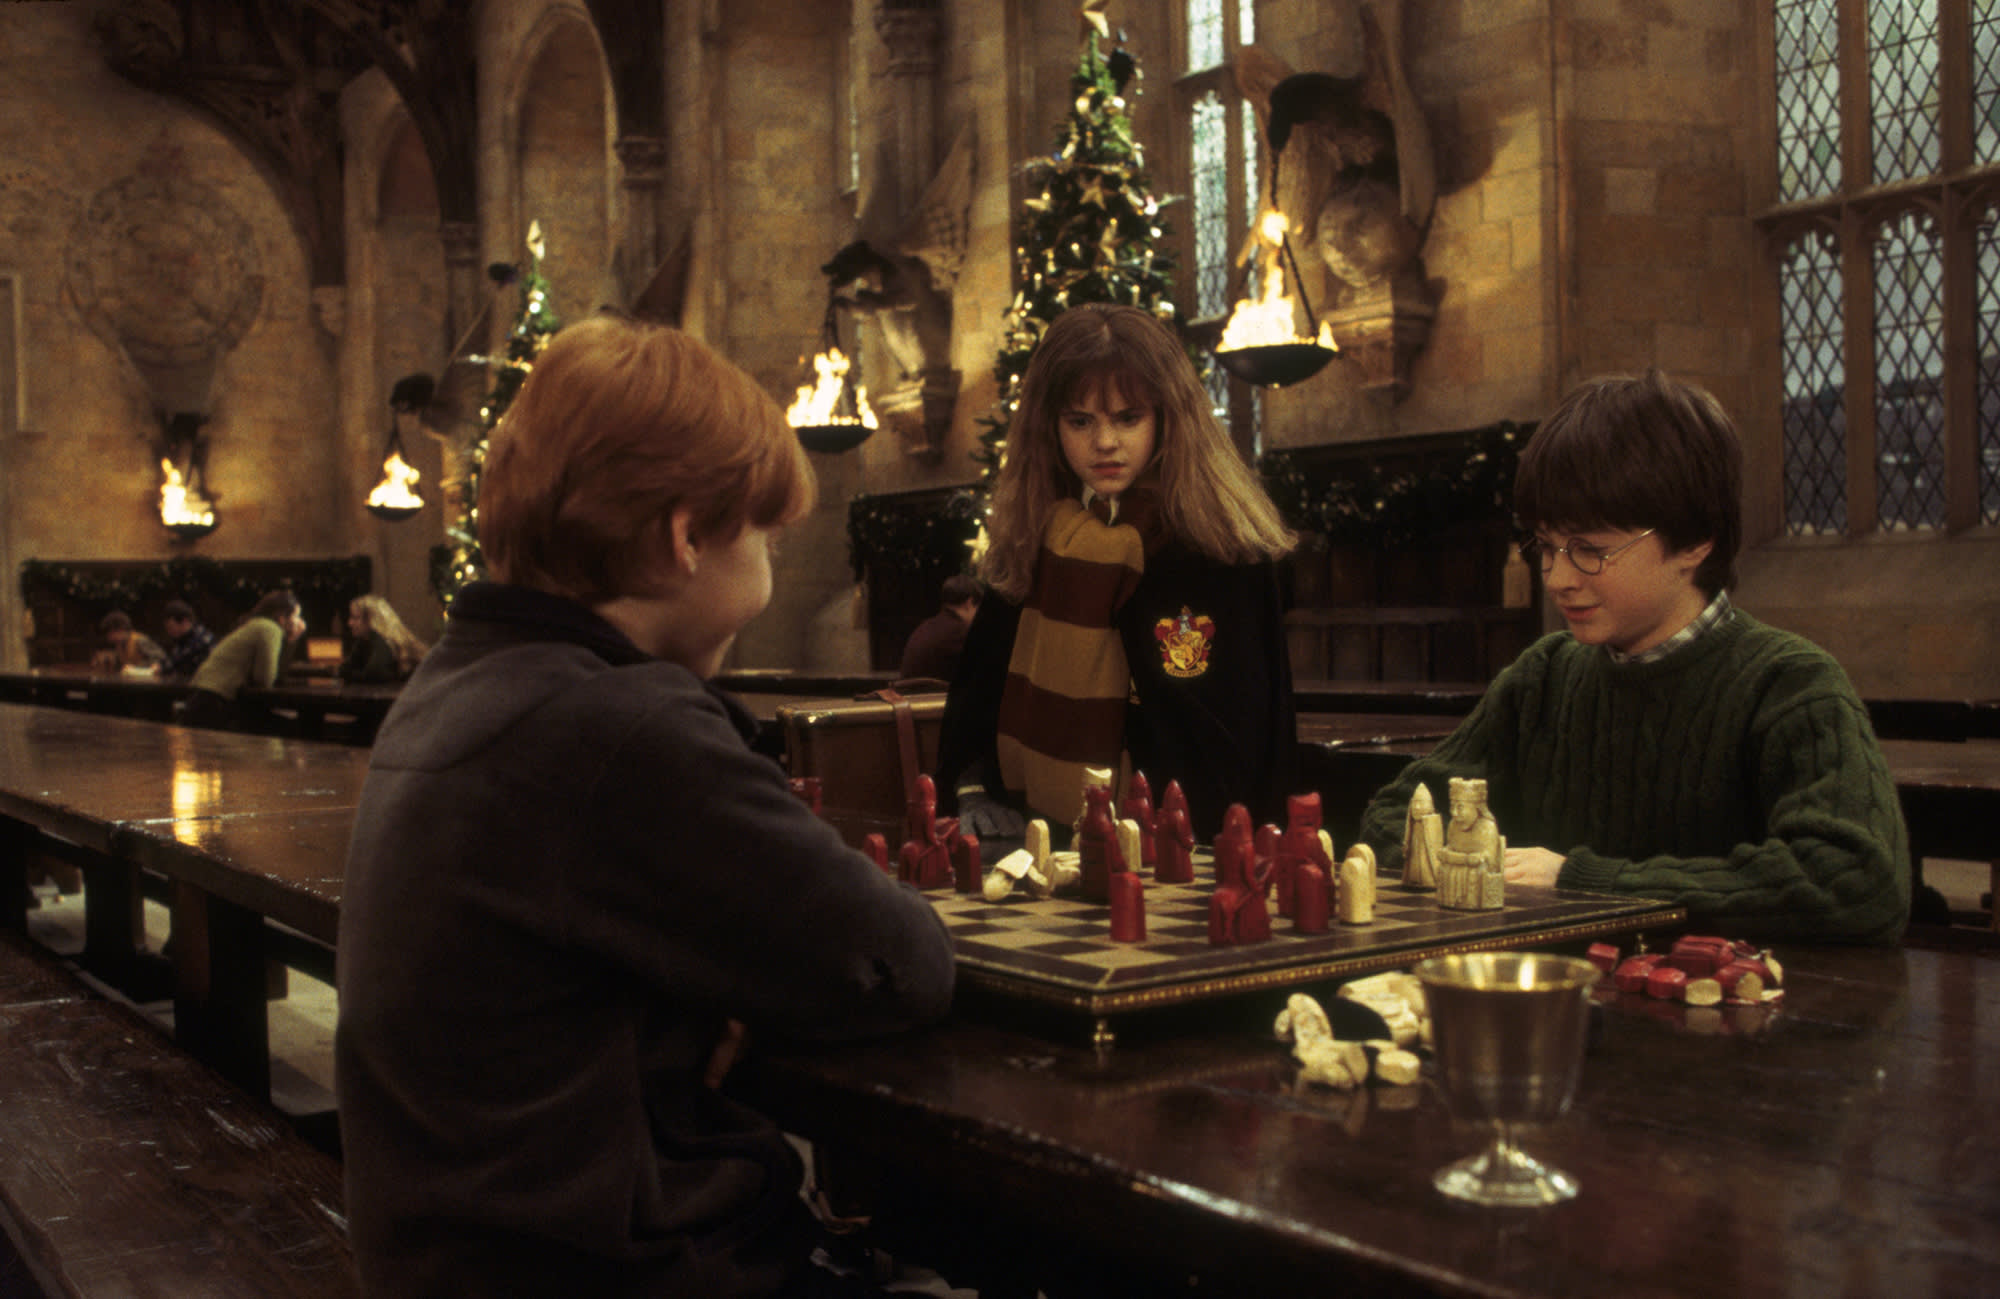 Five reasons why Philosopher's Stone could be considered a Christmas film